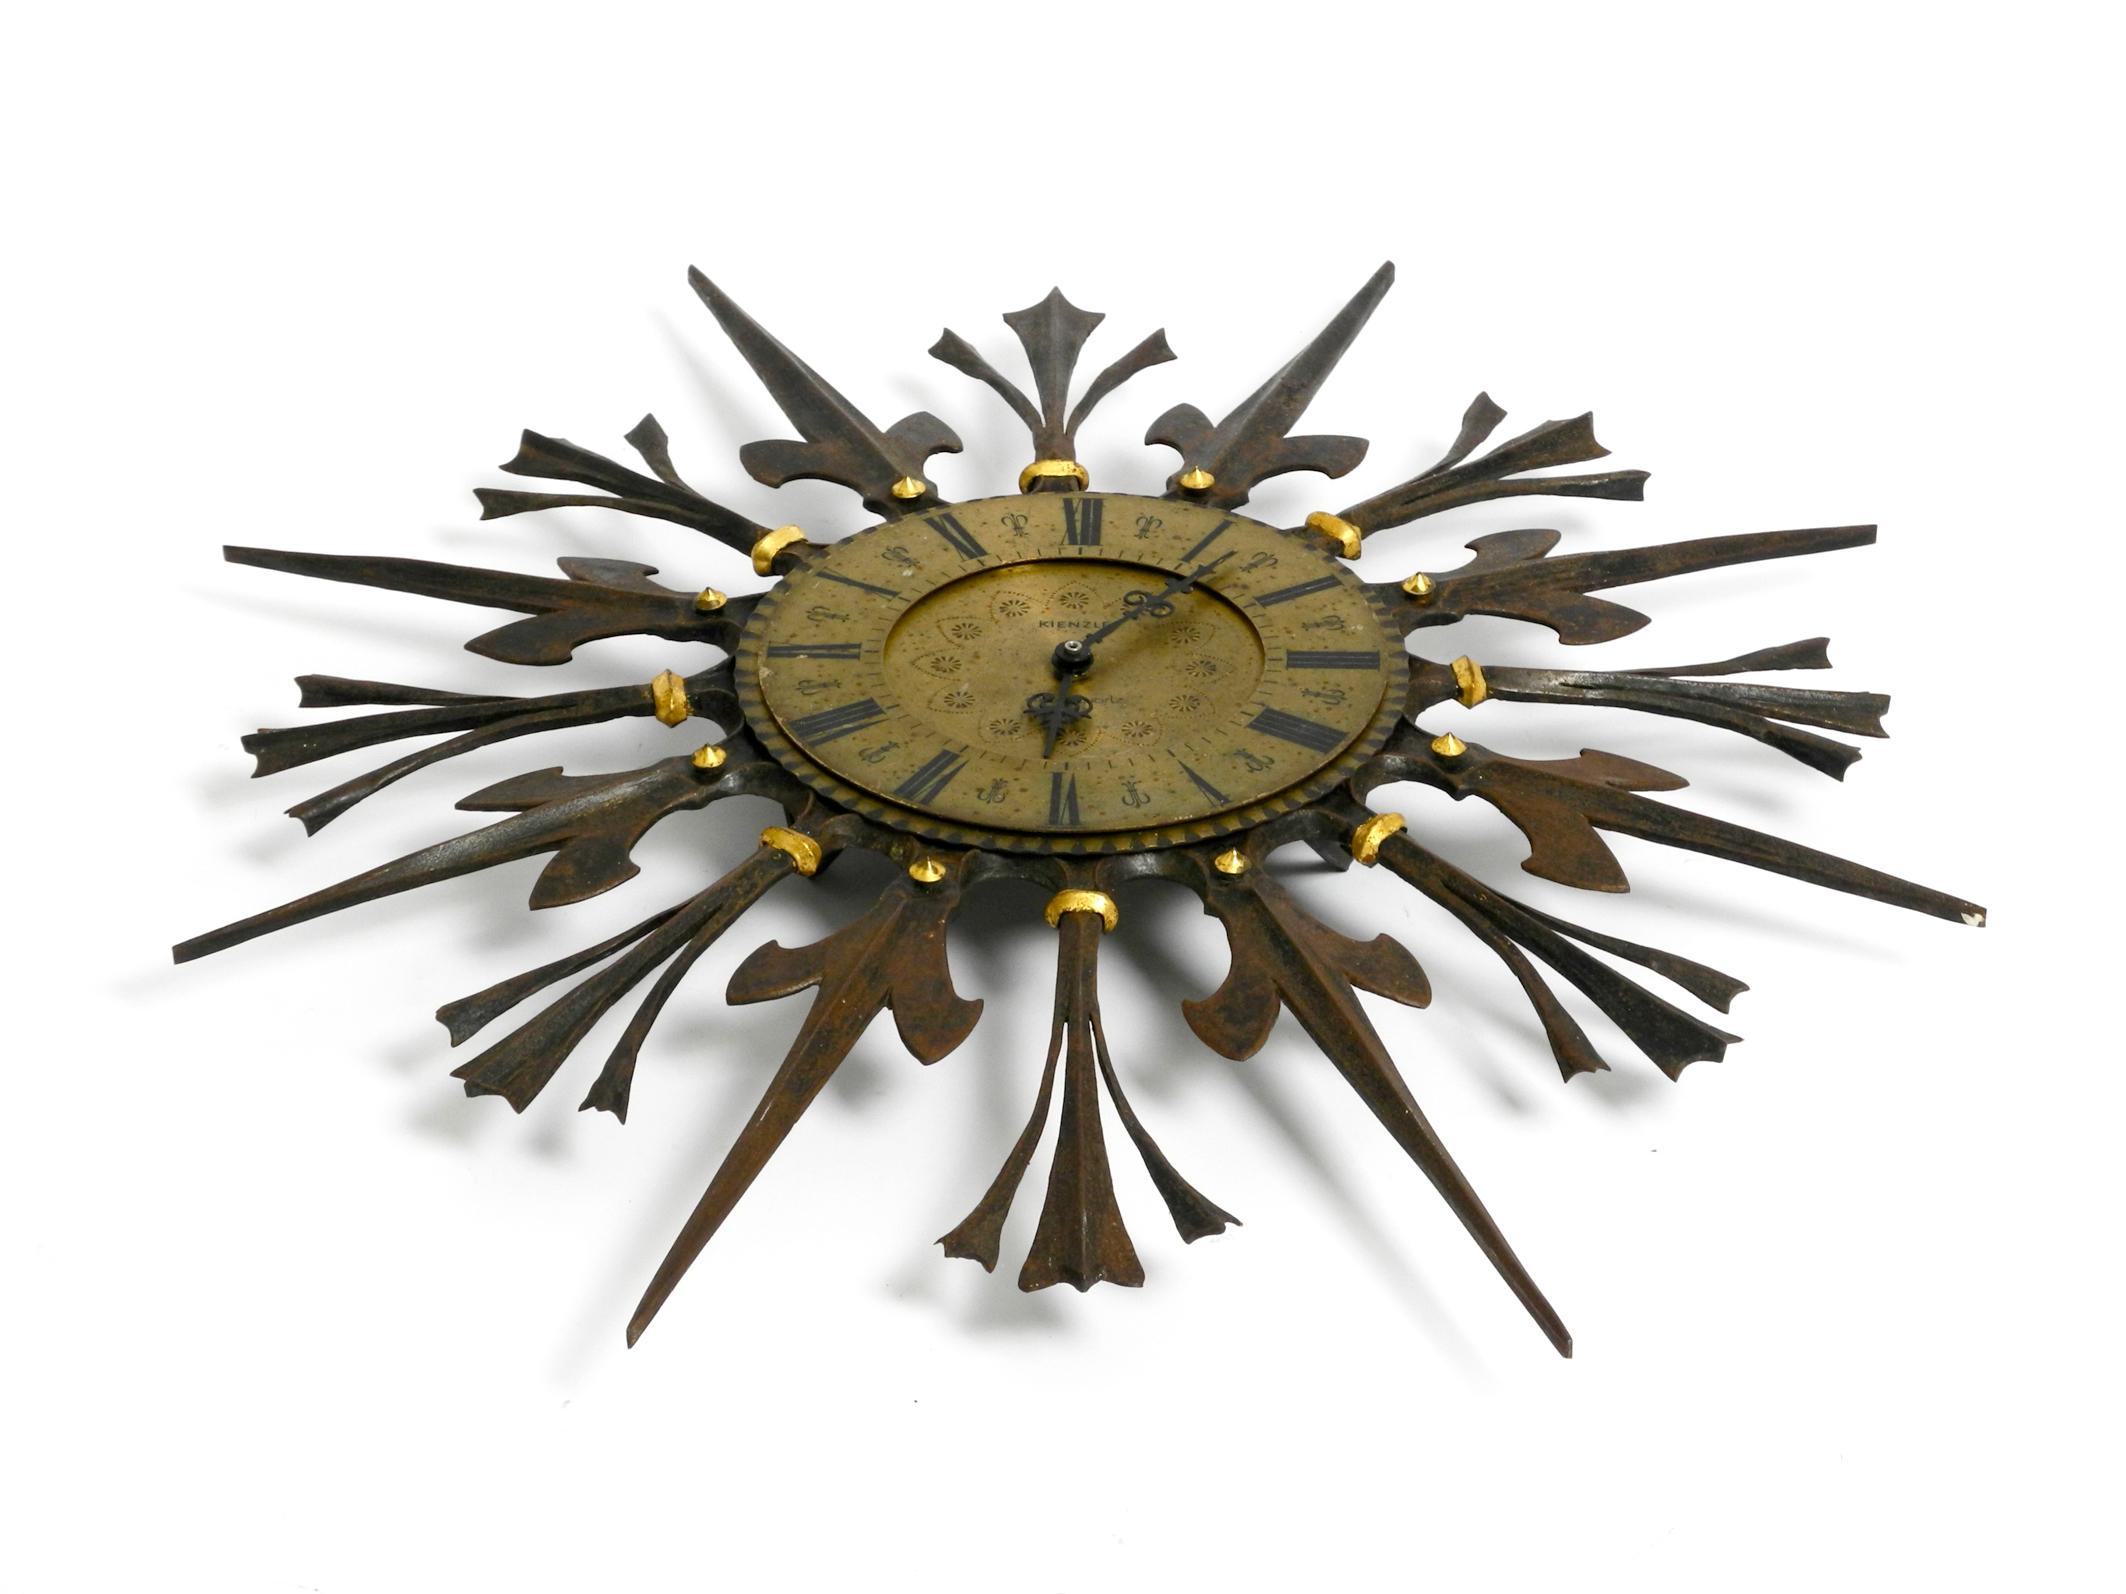 Huge, heavy, unusual 1960s Sunburst wall clock made of black wrought iron.
Manufacturer Kienzle. Made in Germany. Great brutalist design.
Very nice ornate production. Weight about 6 kg.
Battery operated with original clockwork.
The hands and the